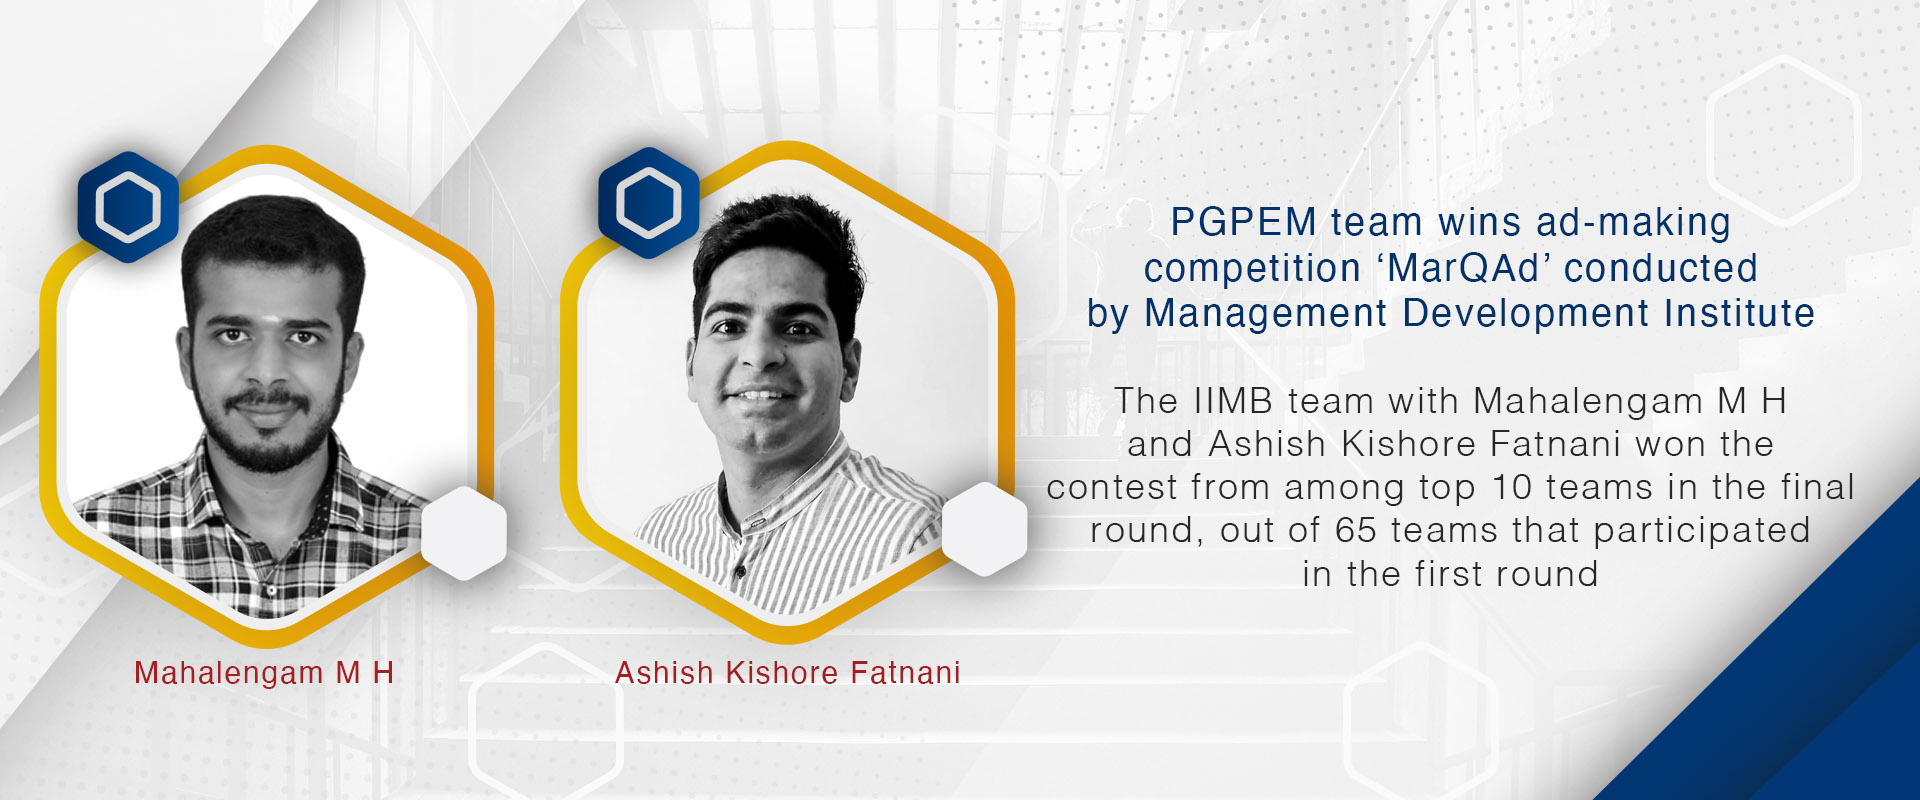 IIMB’s PGPEM team wins ad-making competition ‘MarQAd’ conducted by Management Development Institute 